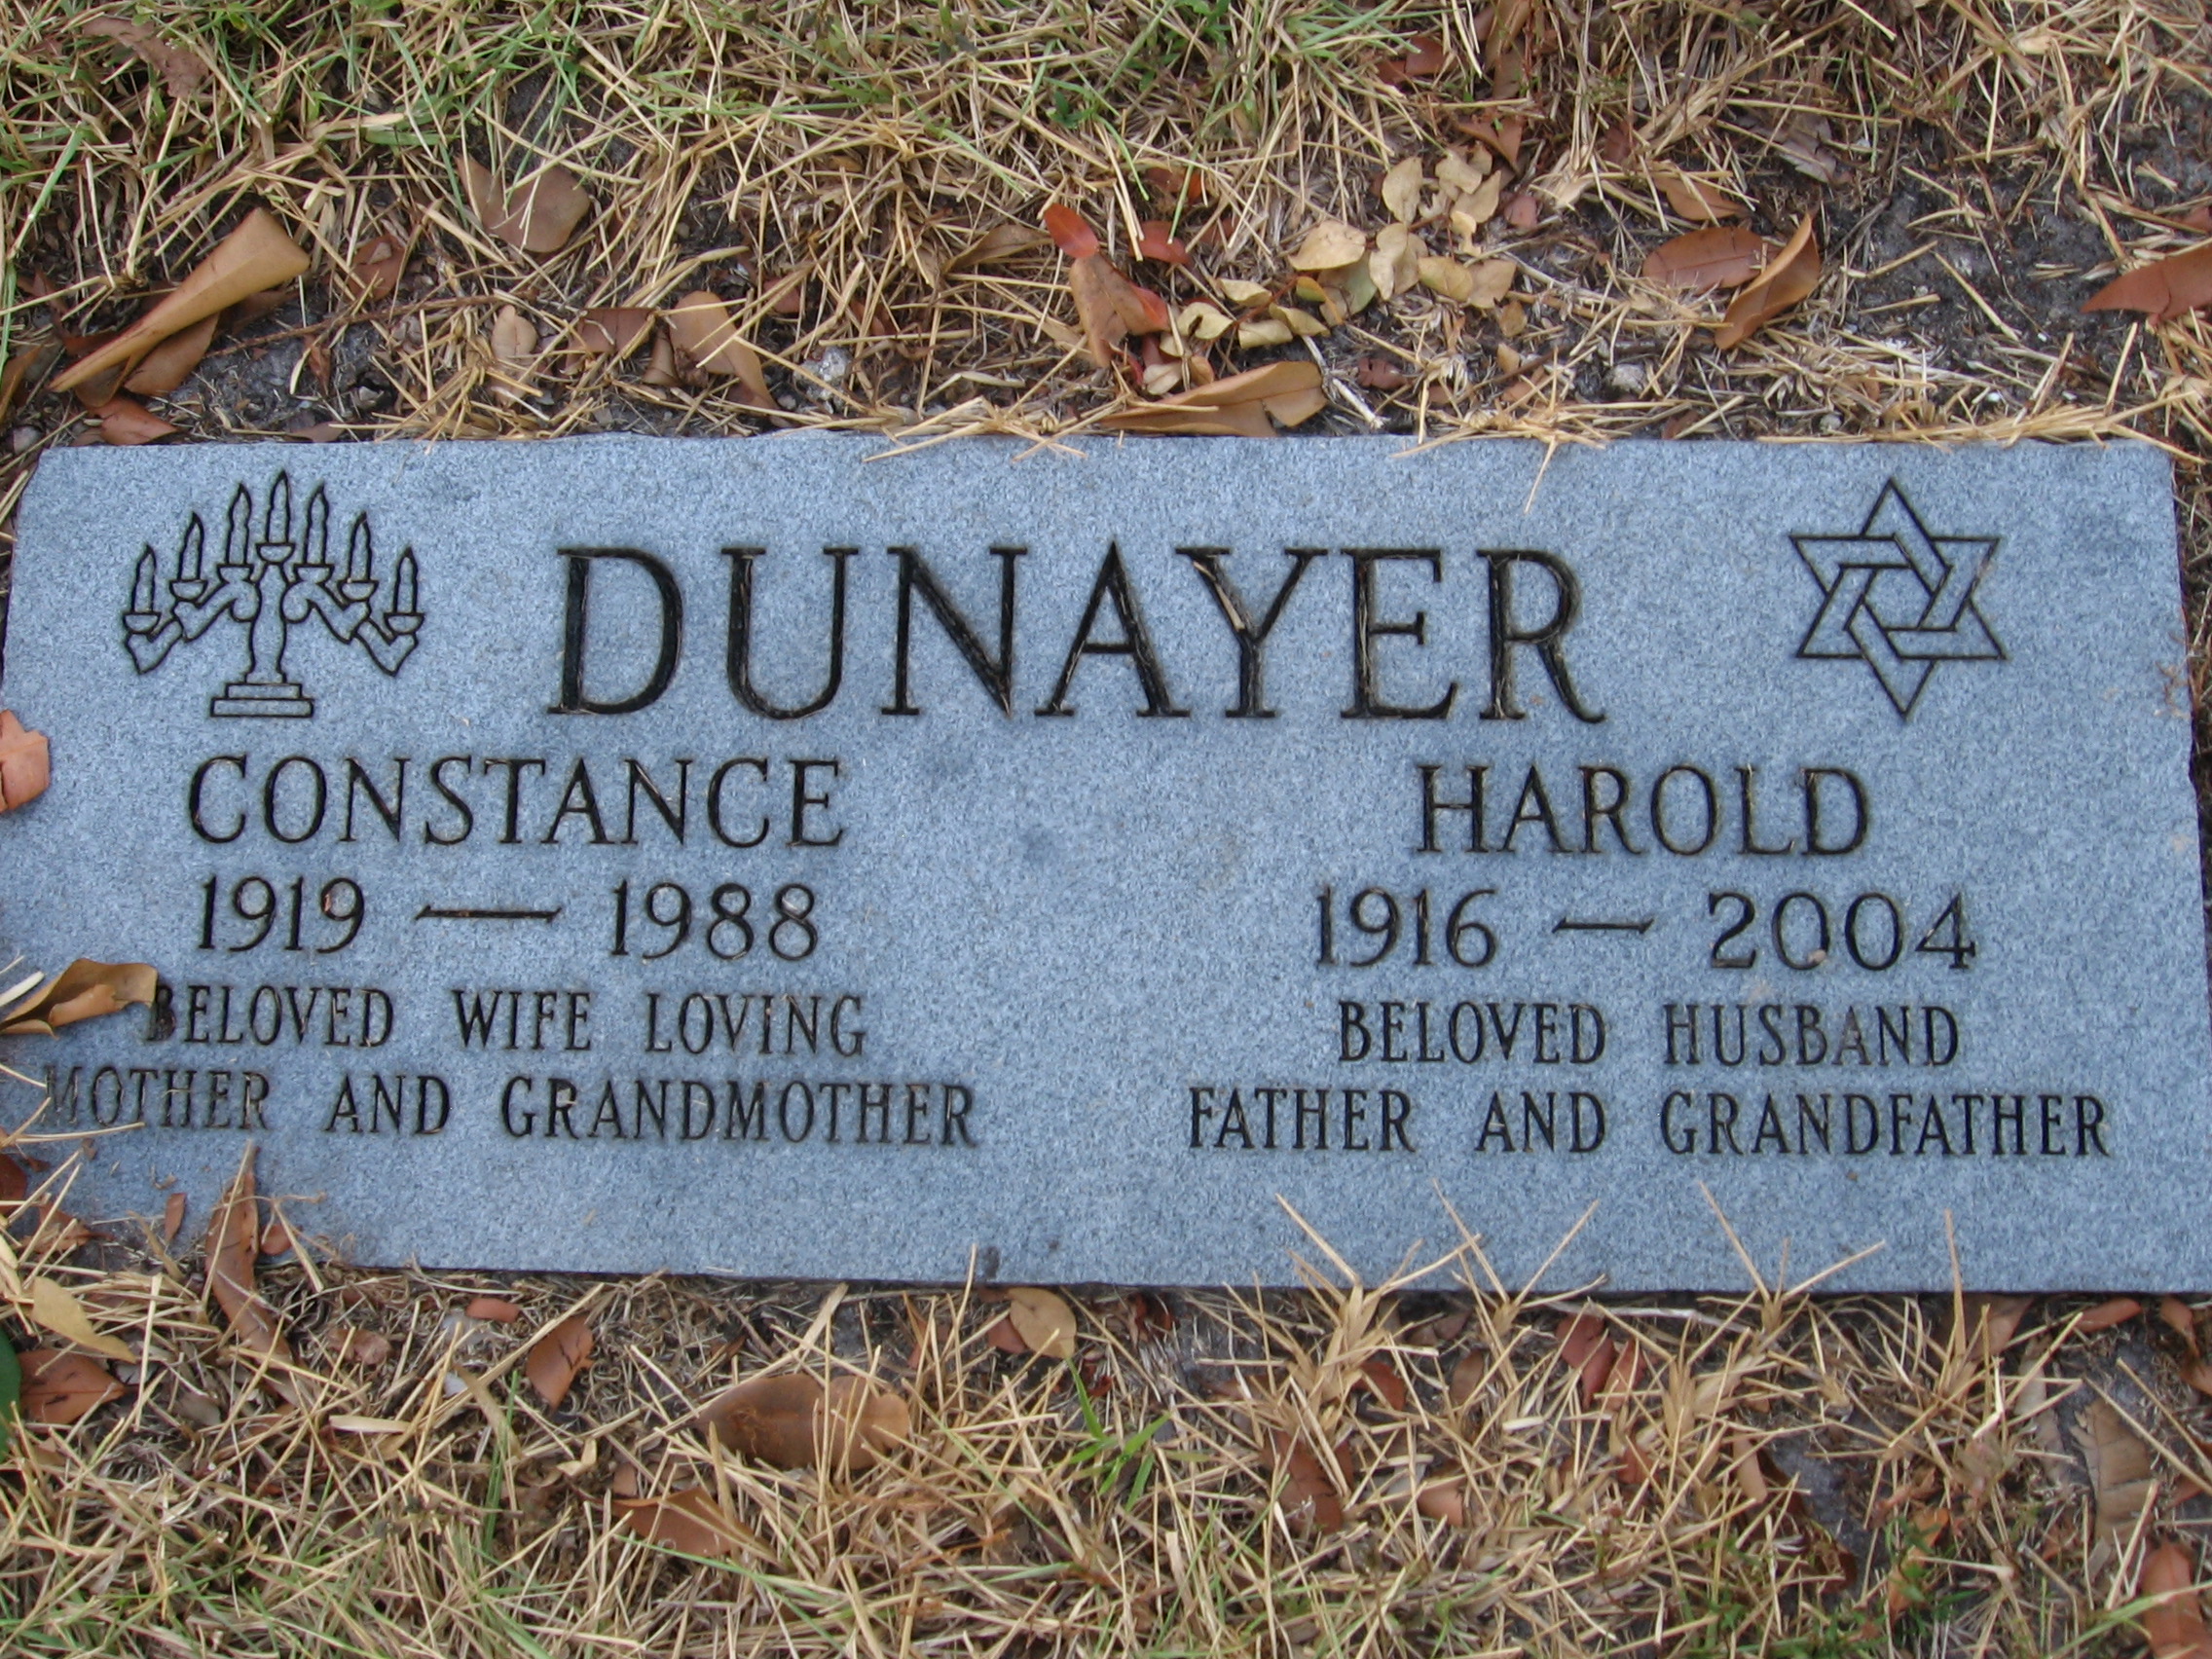 Constance Dunayer